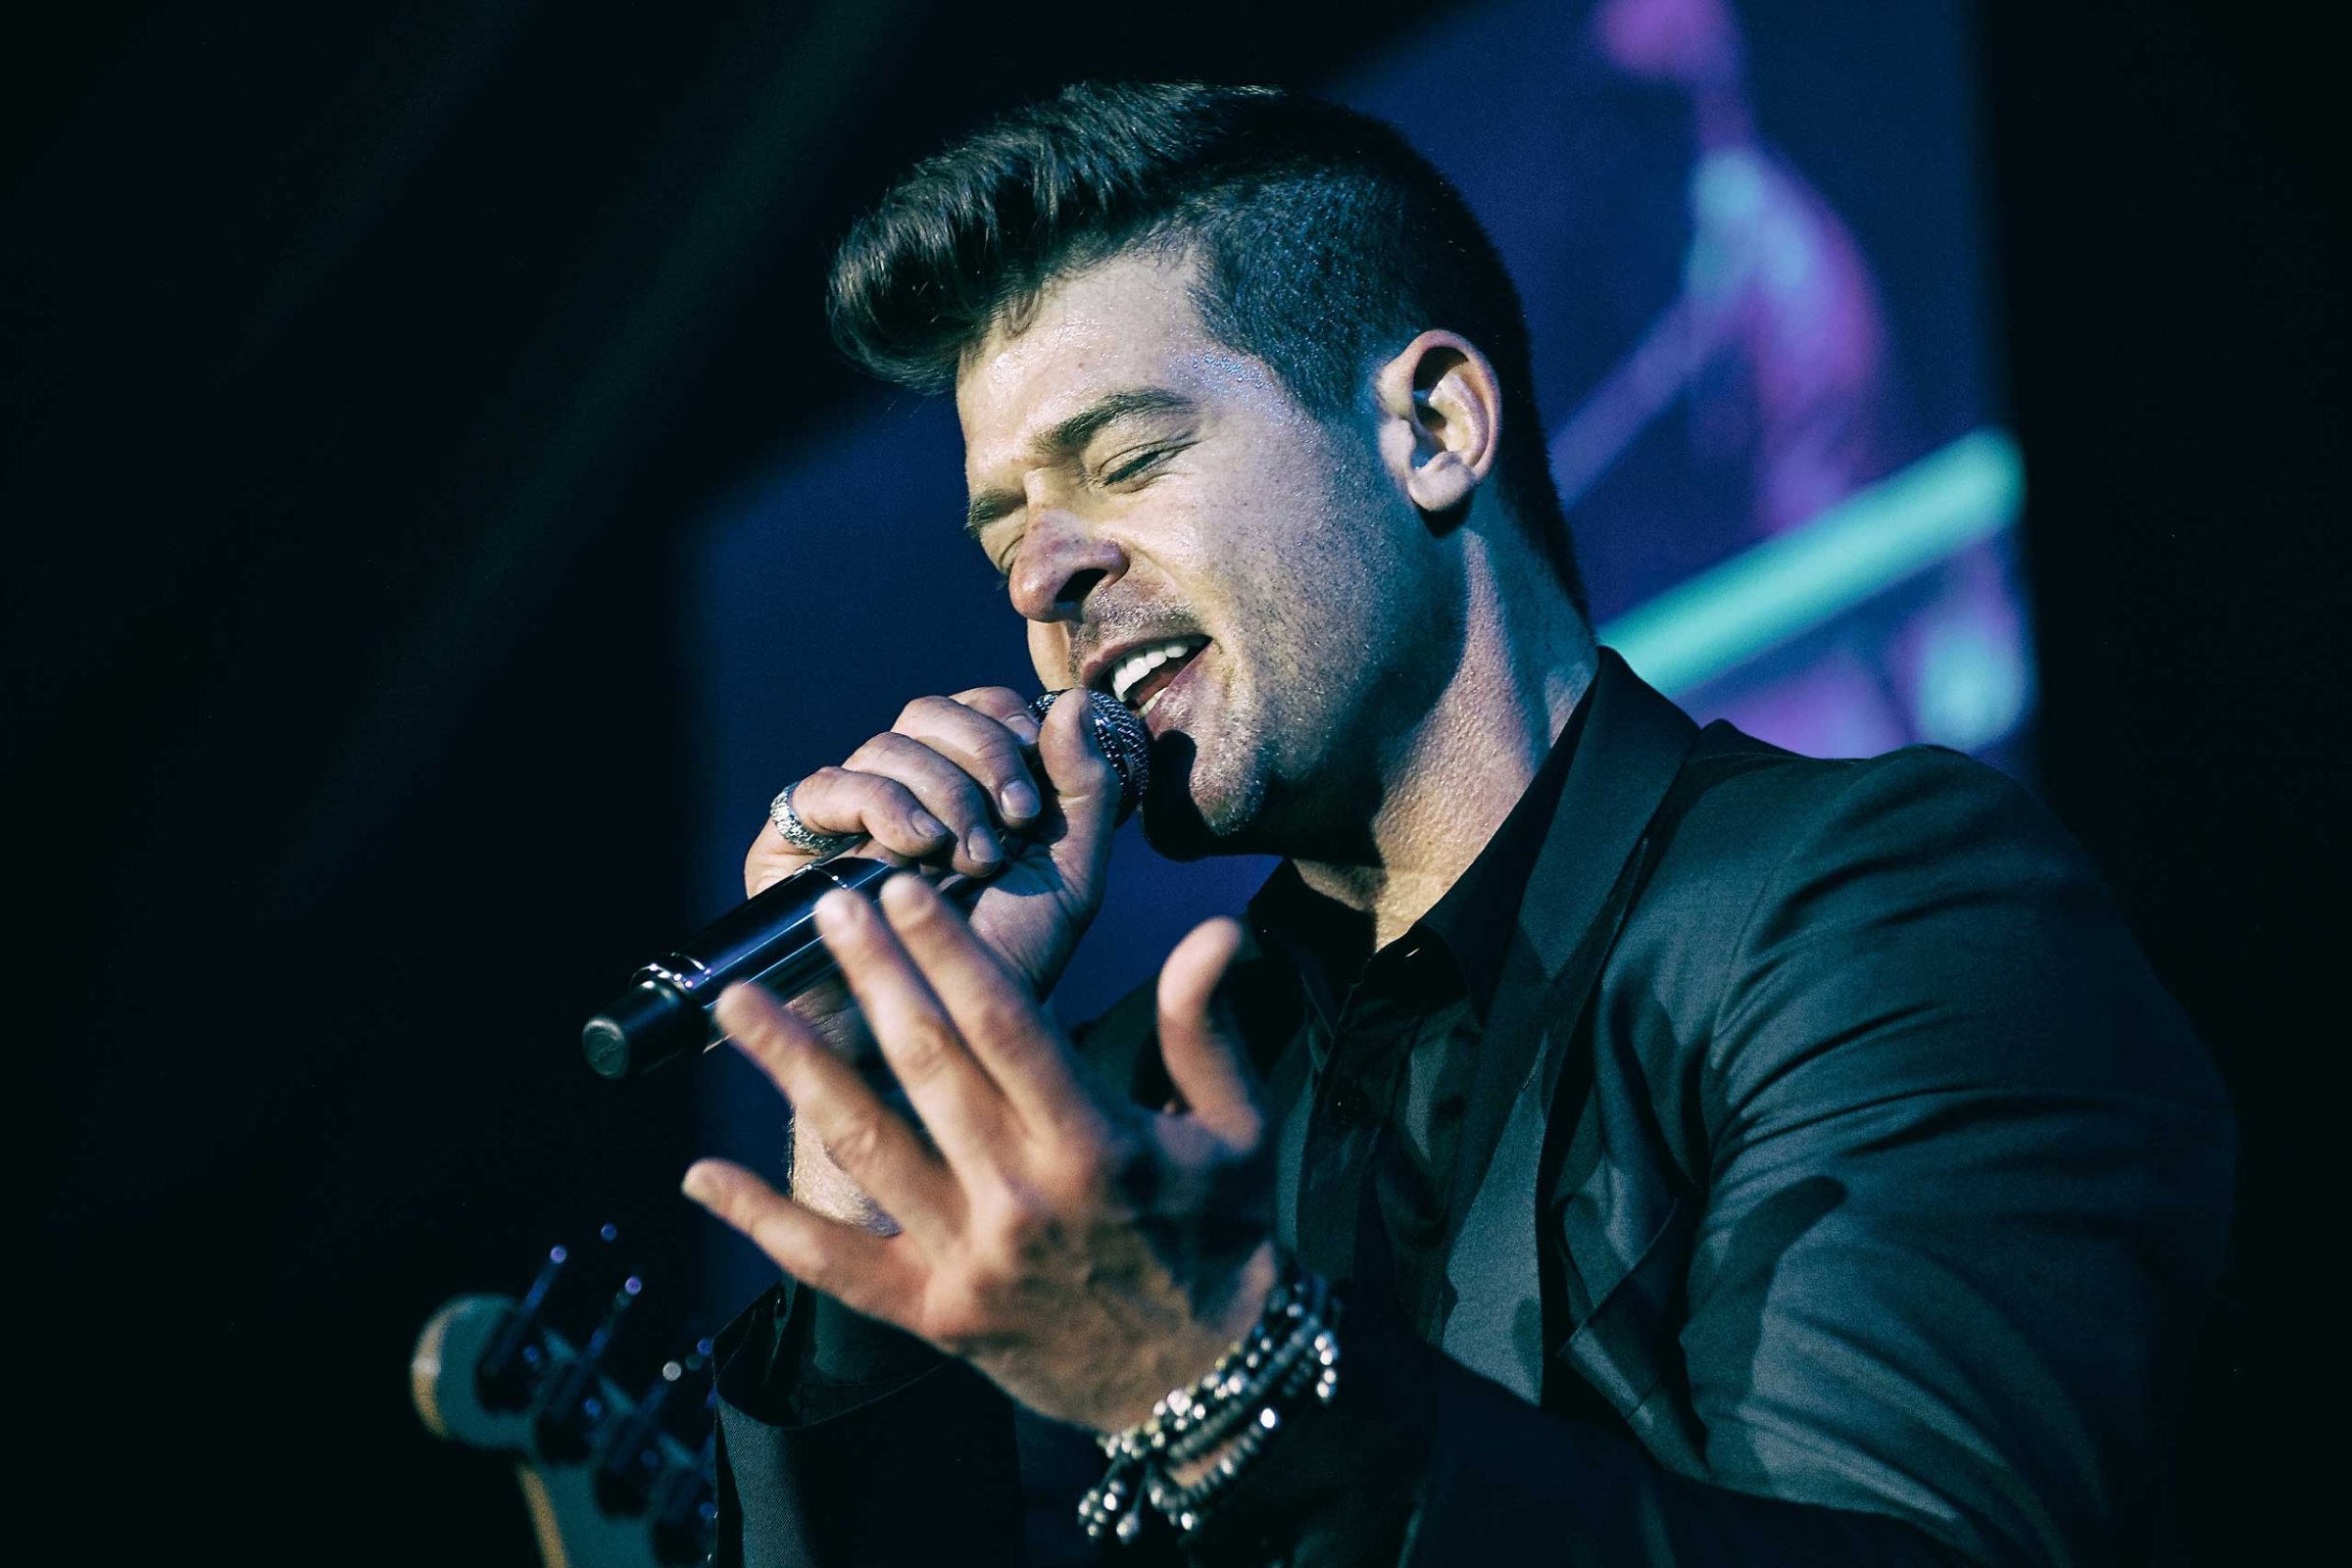 Robin Thicke performs in Hong Kong on March 14, 2015.